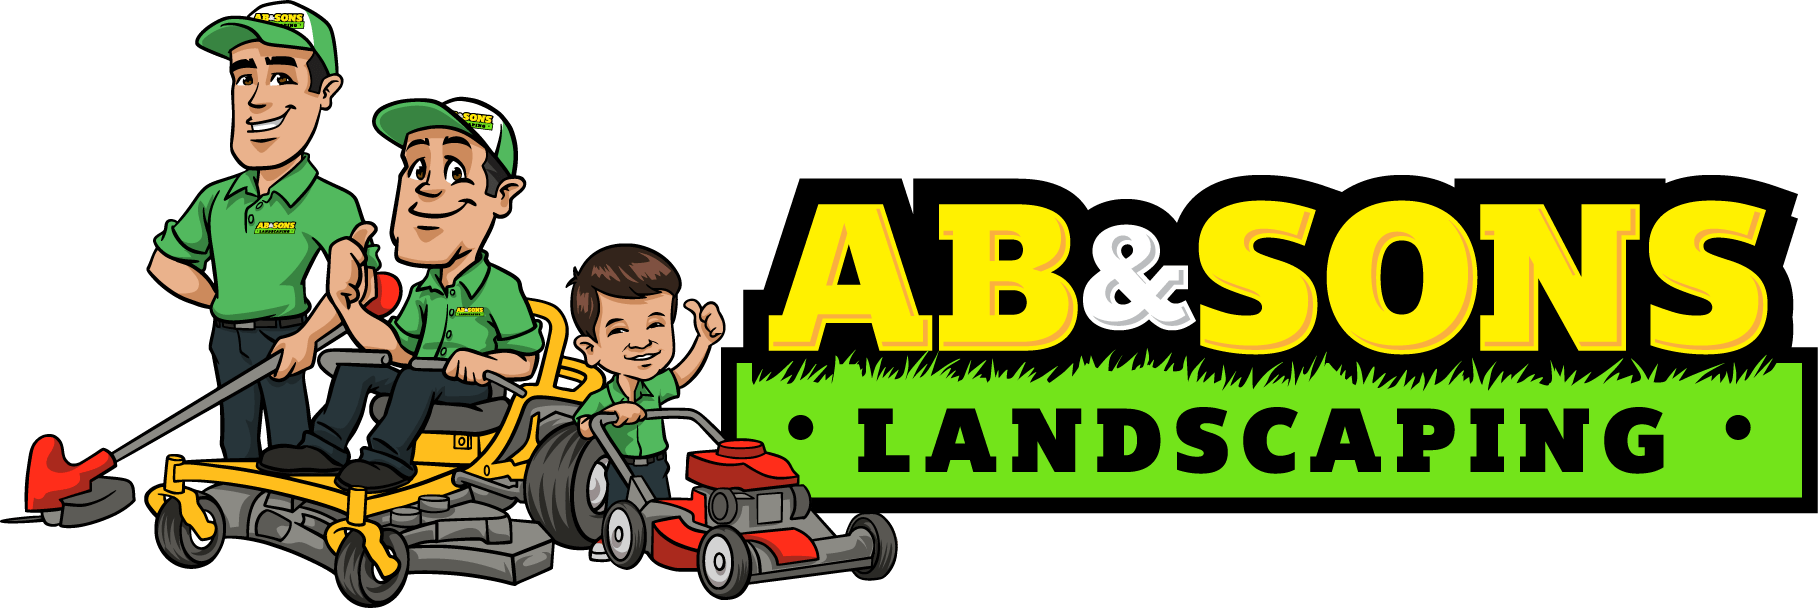 AB & Sons Landscaping Logo